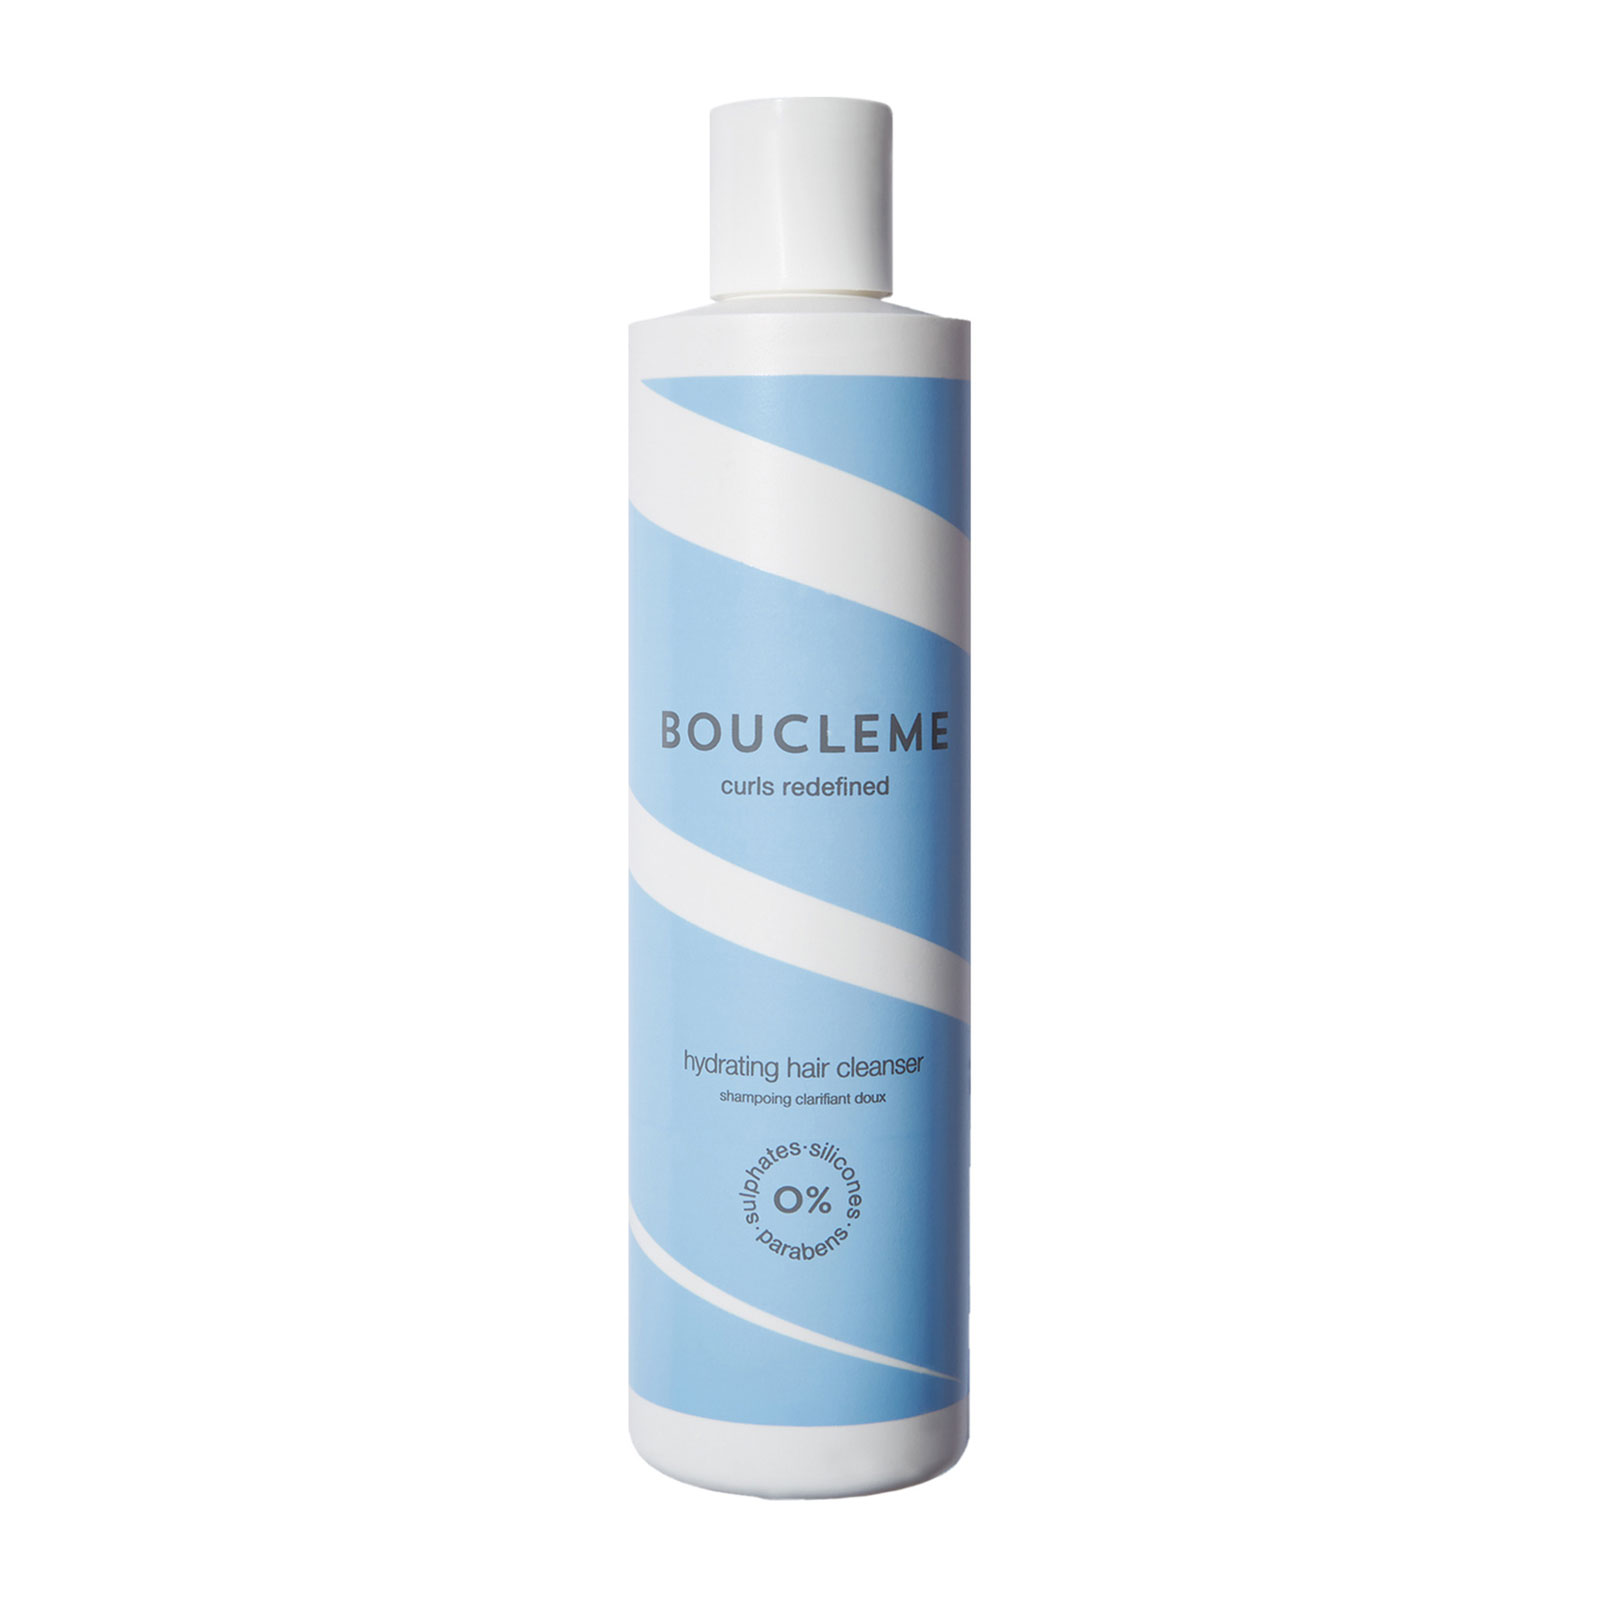 Boucl�me Hydrating Hair Cleanser 300ml